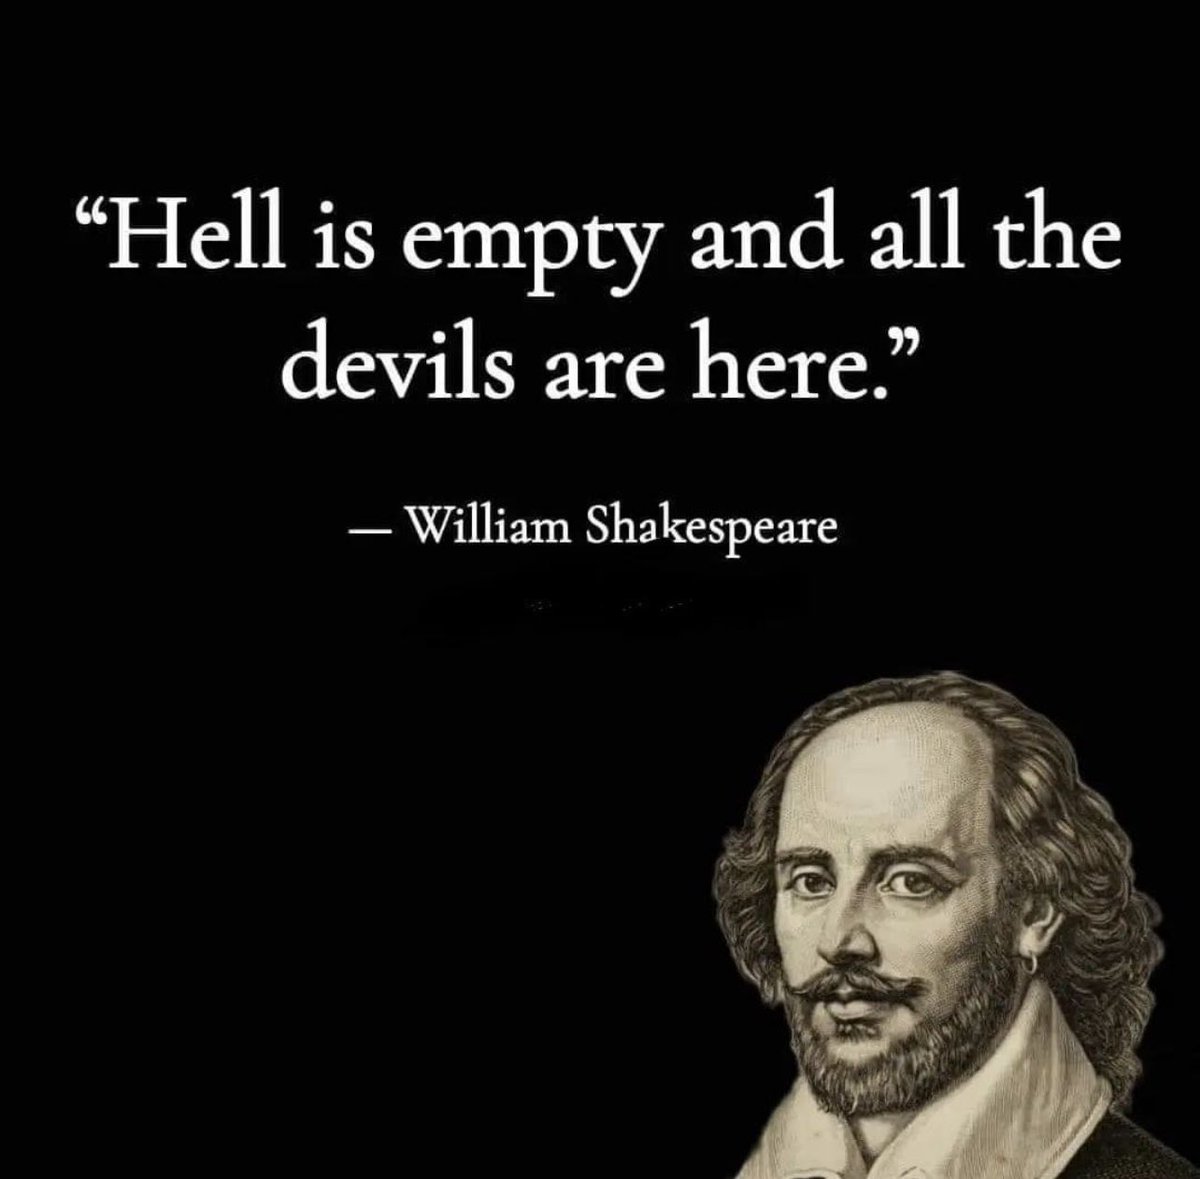 “Hell is empty and all the devils are here.” 

William Shakespeare 
The Tempest 
Act 1, Scene 2 

#Shakespeare #Tempest #quote #quoteoftheday #quotes #literate #war #Governance #corruption #socialcommentary #powerdynamics #politicaltheatre #leadership #activism